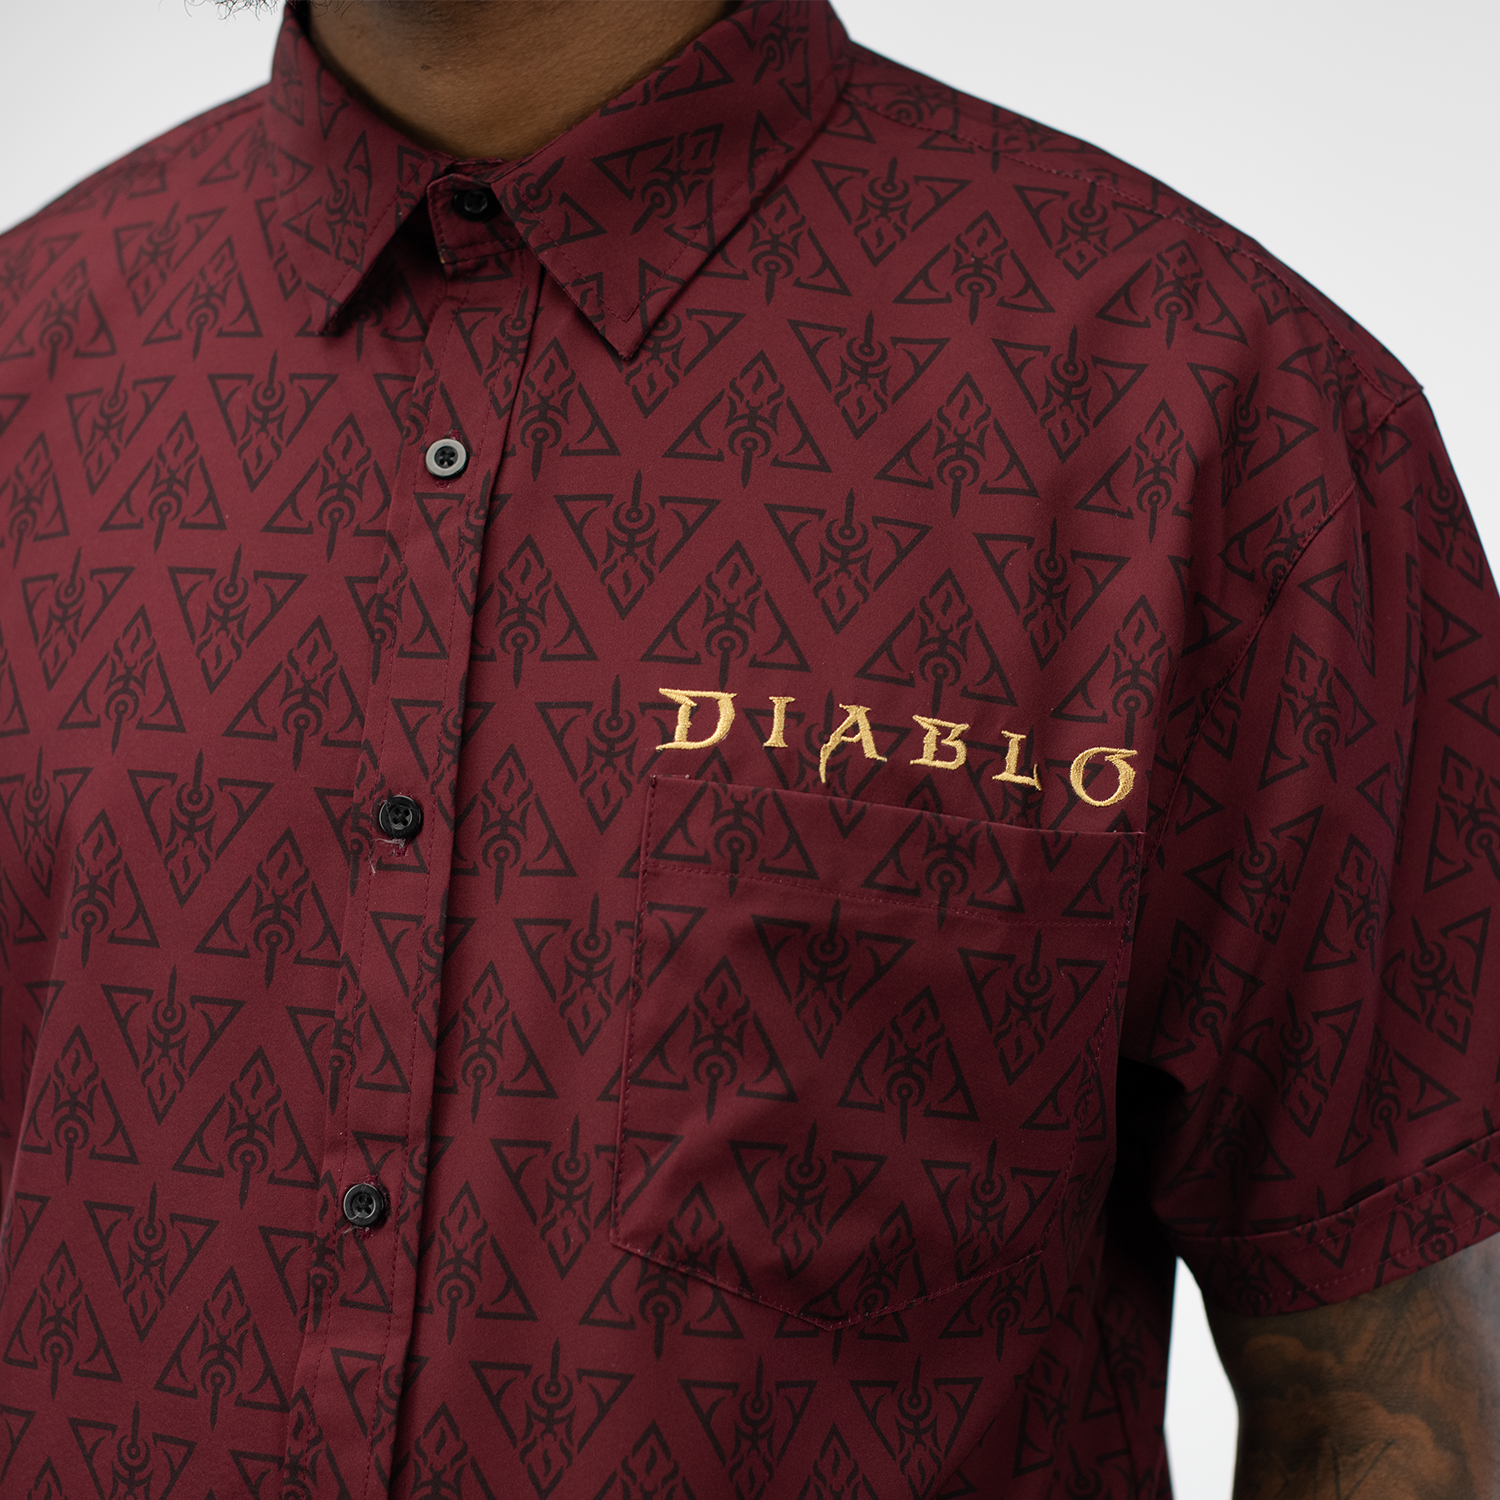 Diablo Button-Up Red Shirt - Model Close-Up View